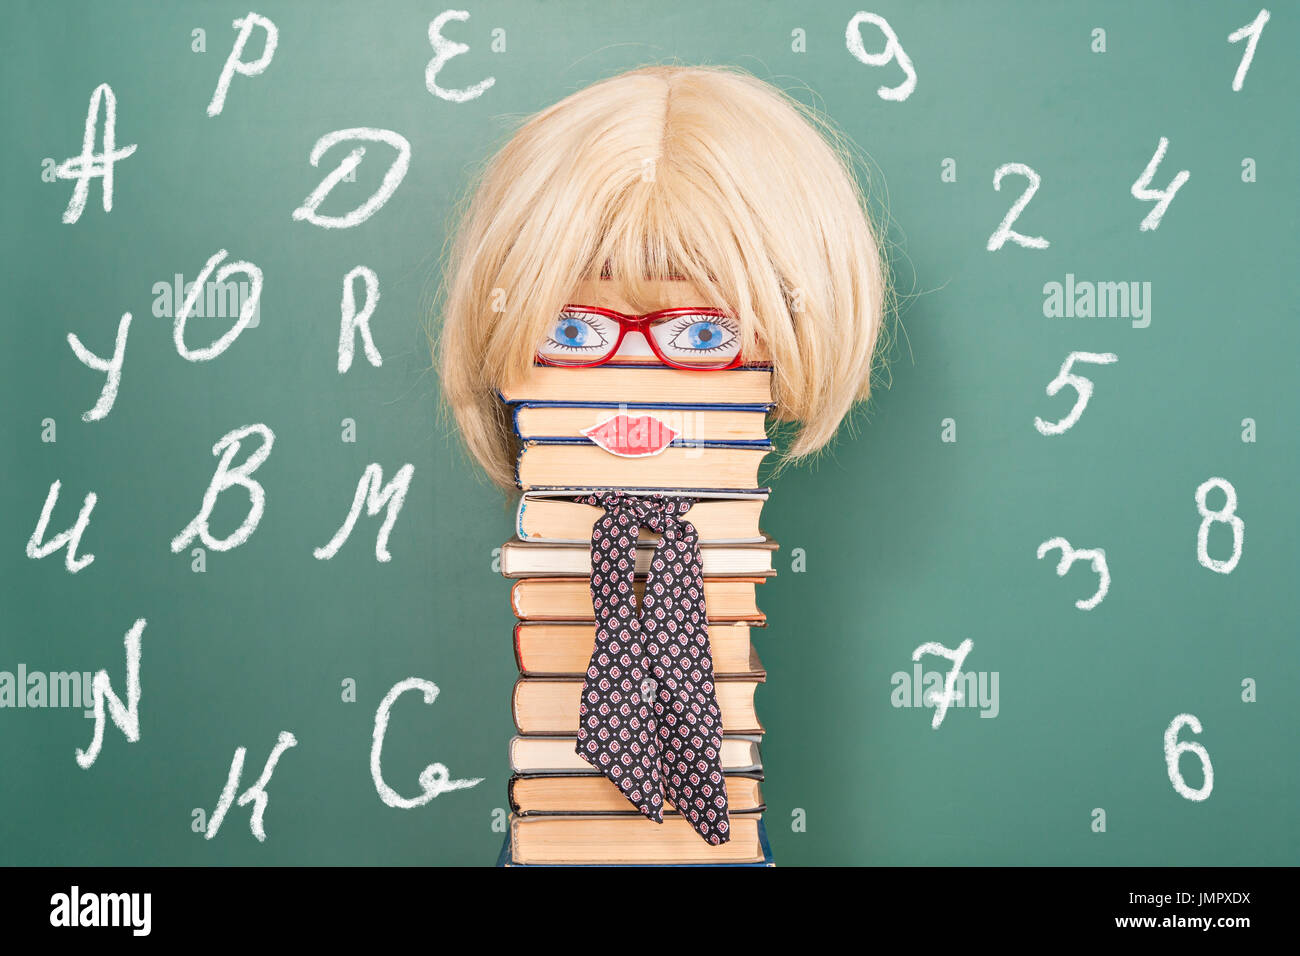 Funny education idea, woman teacher in front of blackboard with copy space Stock Photo